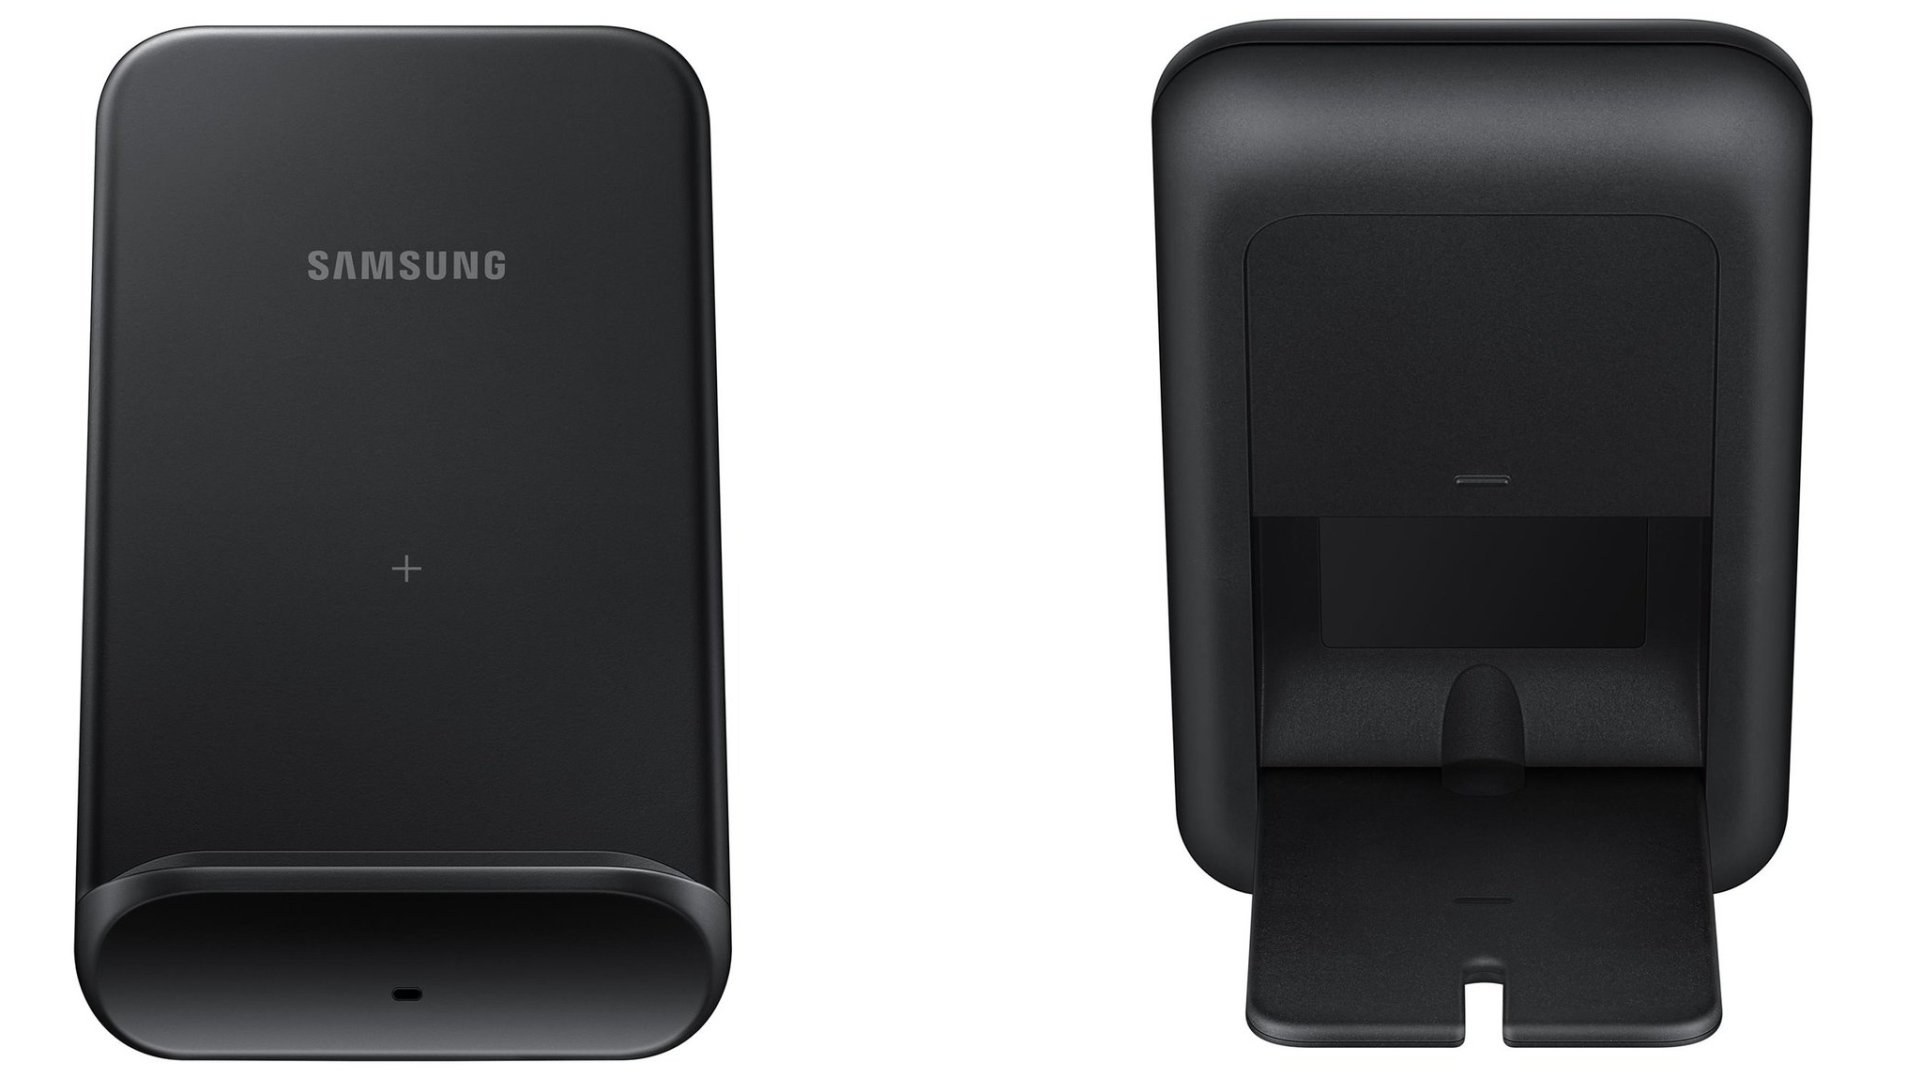 Take a look at Samsung's upcoming convertible fast wireless